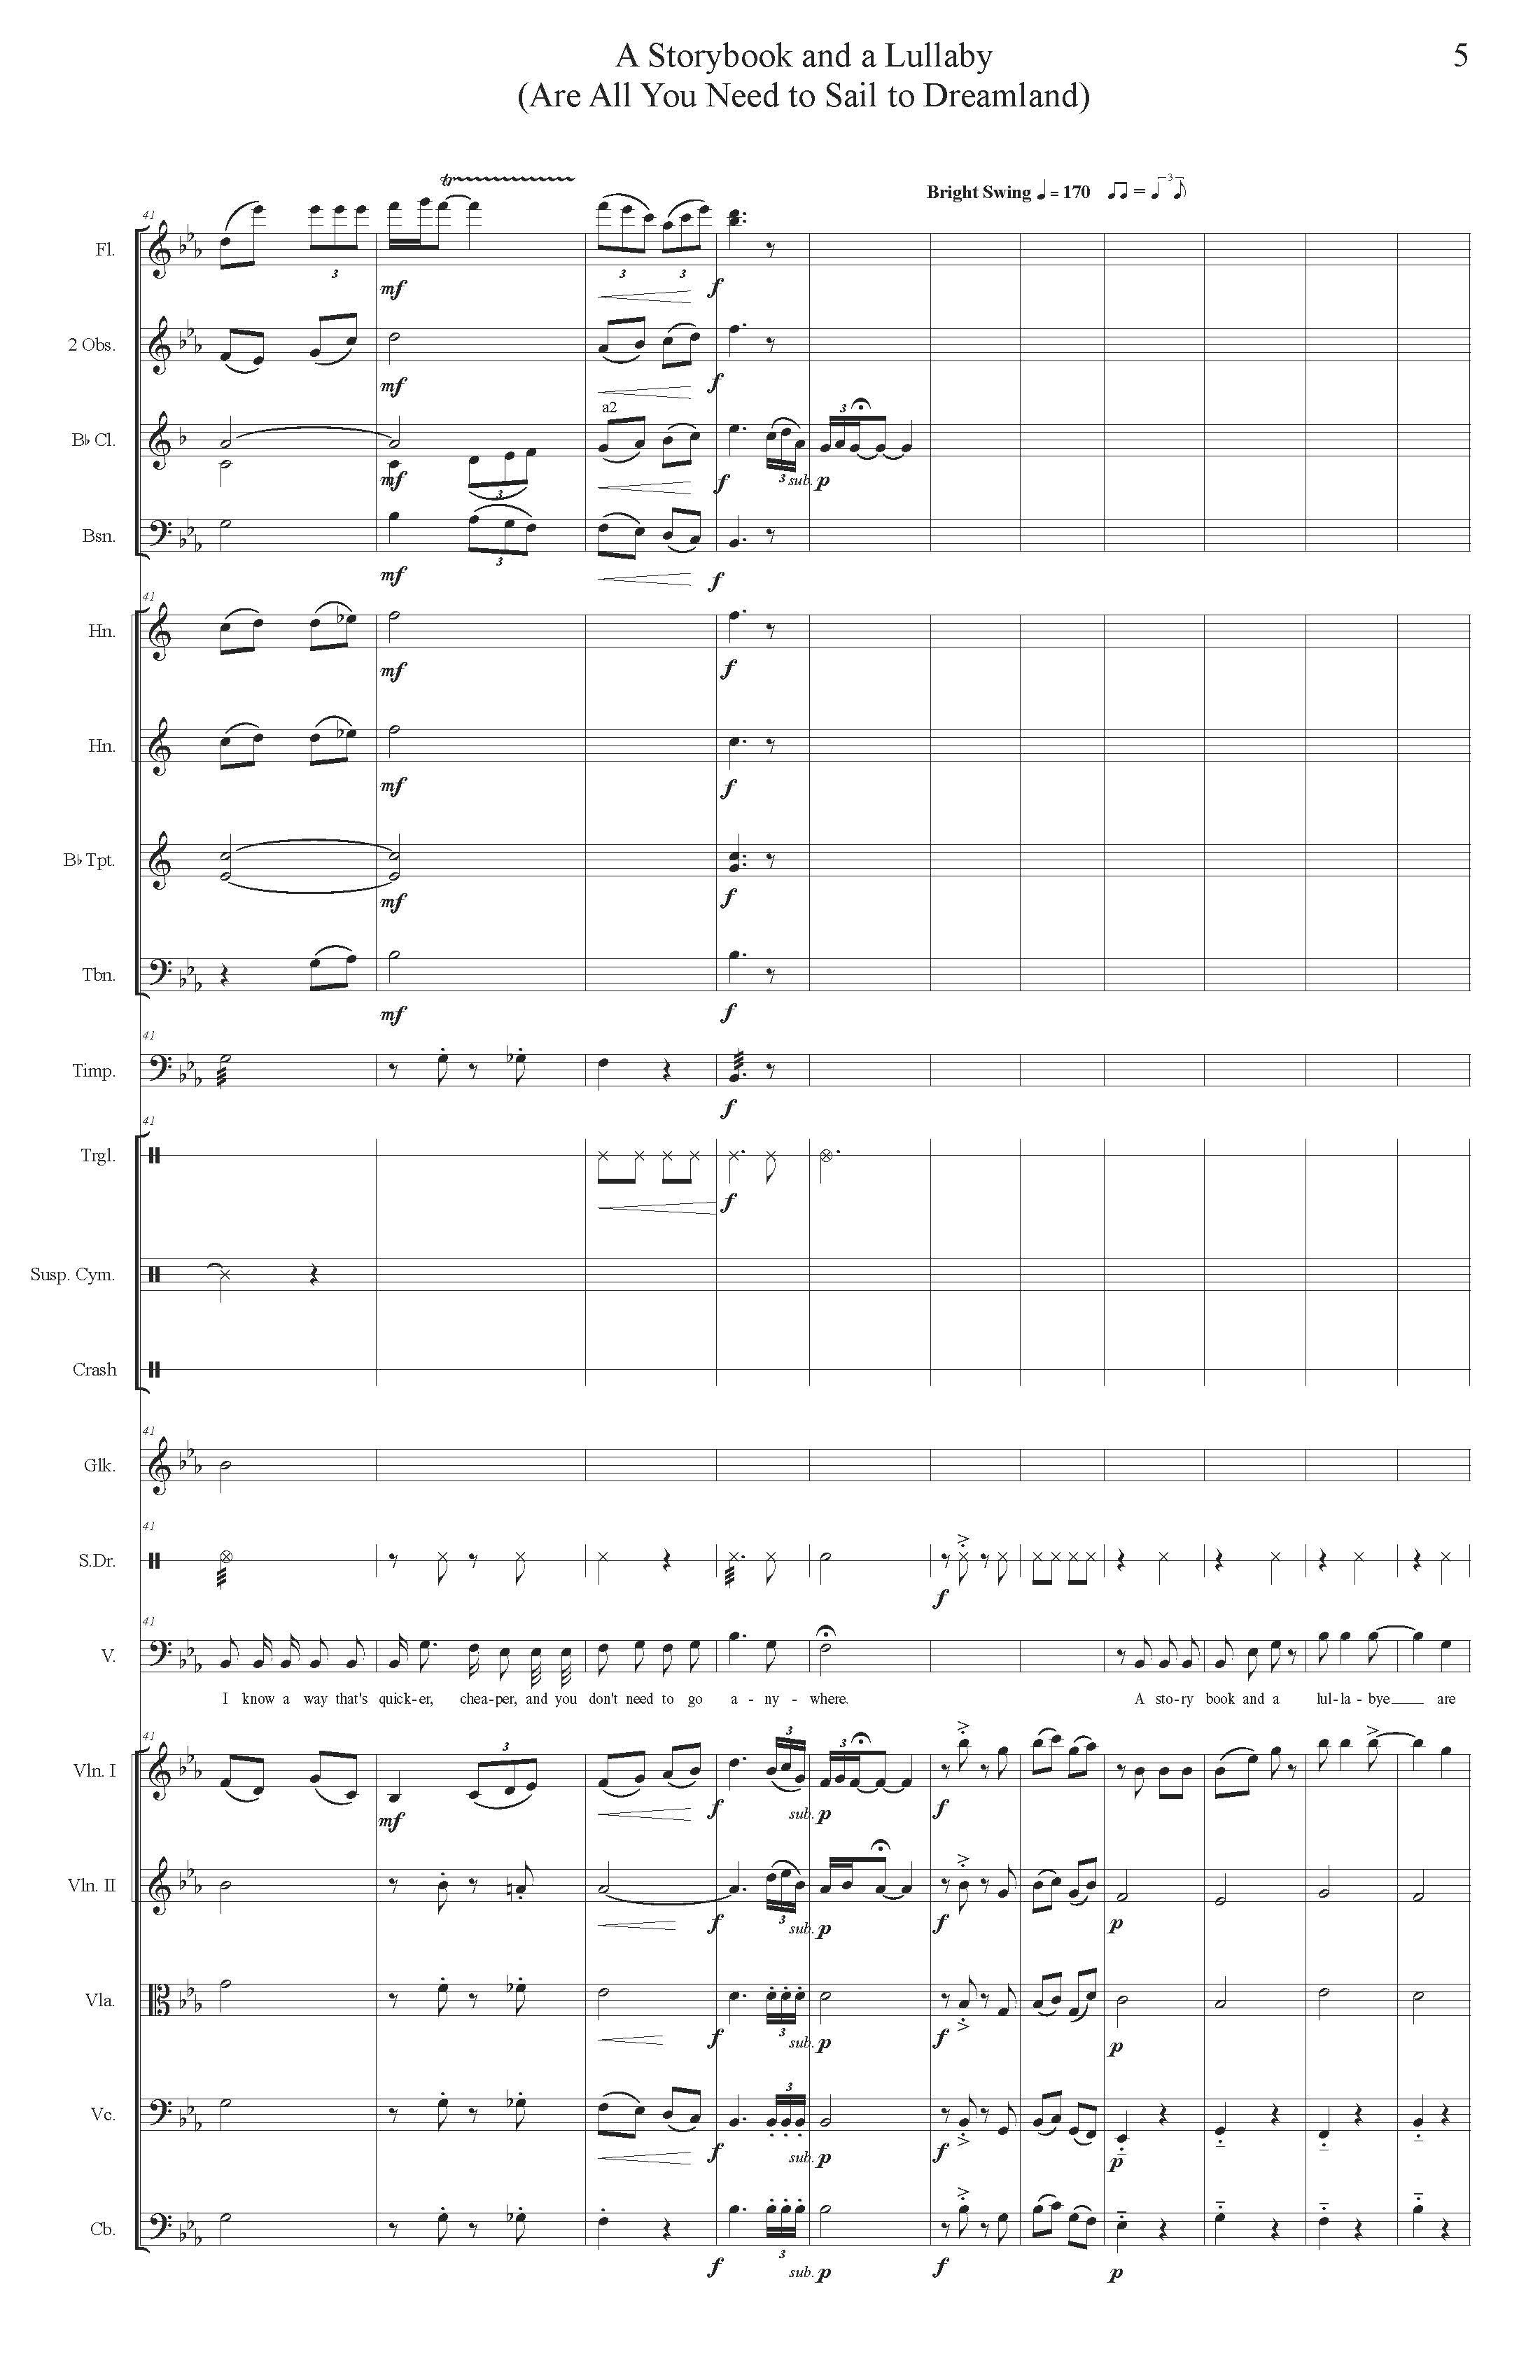 A STORYBOOK AND A LULLABY ORCH - Score_Page_05.jpg